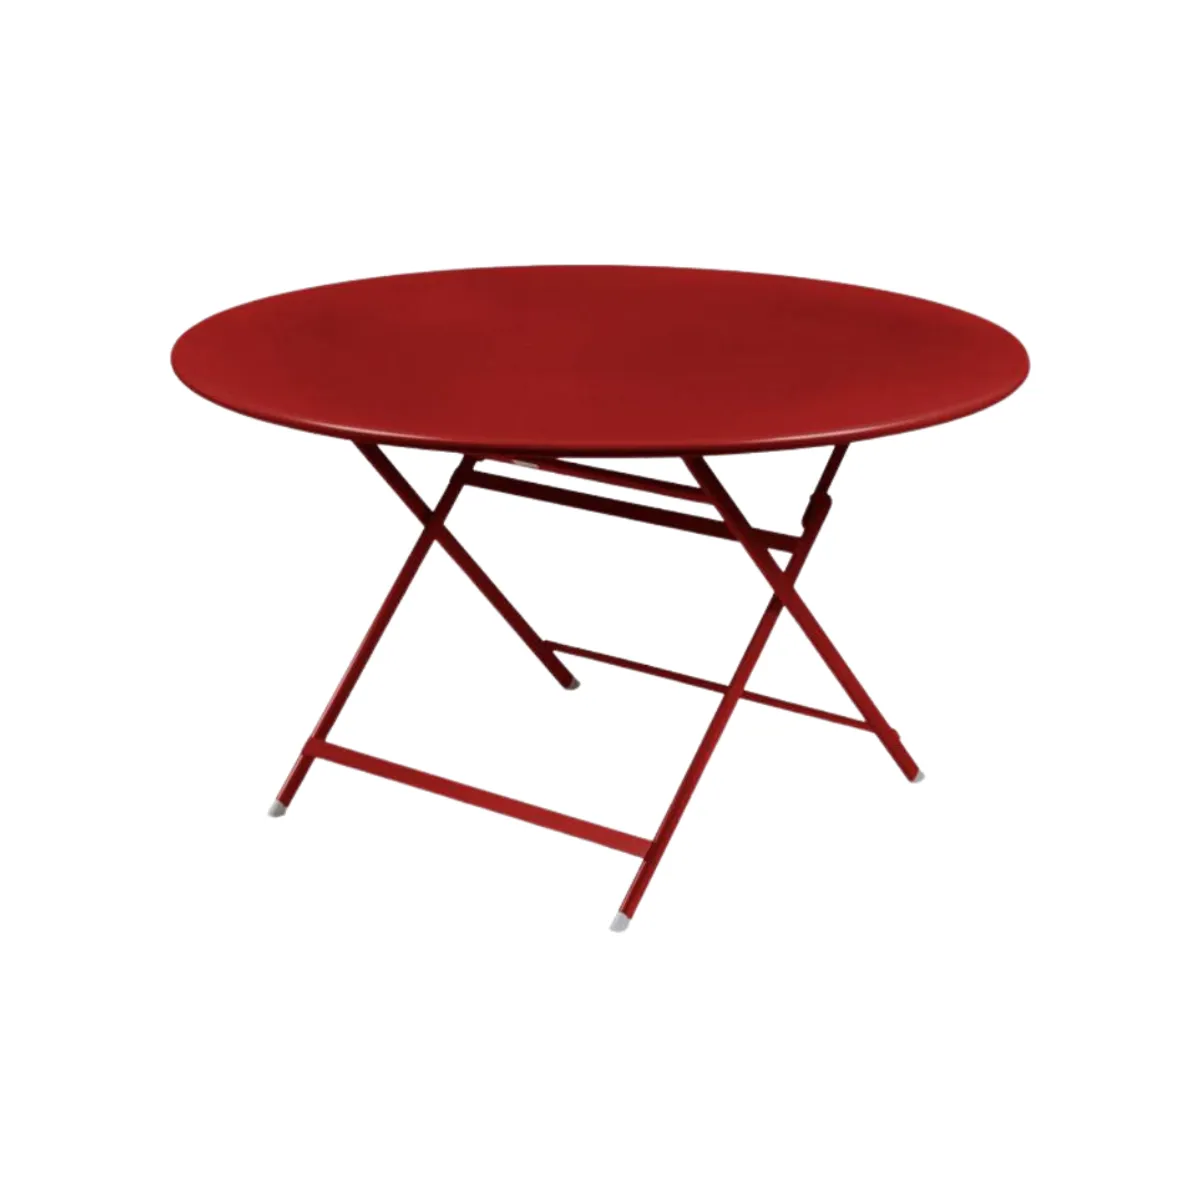 Caractere round folding table 4